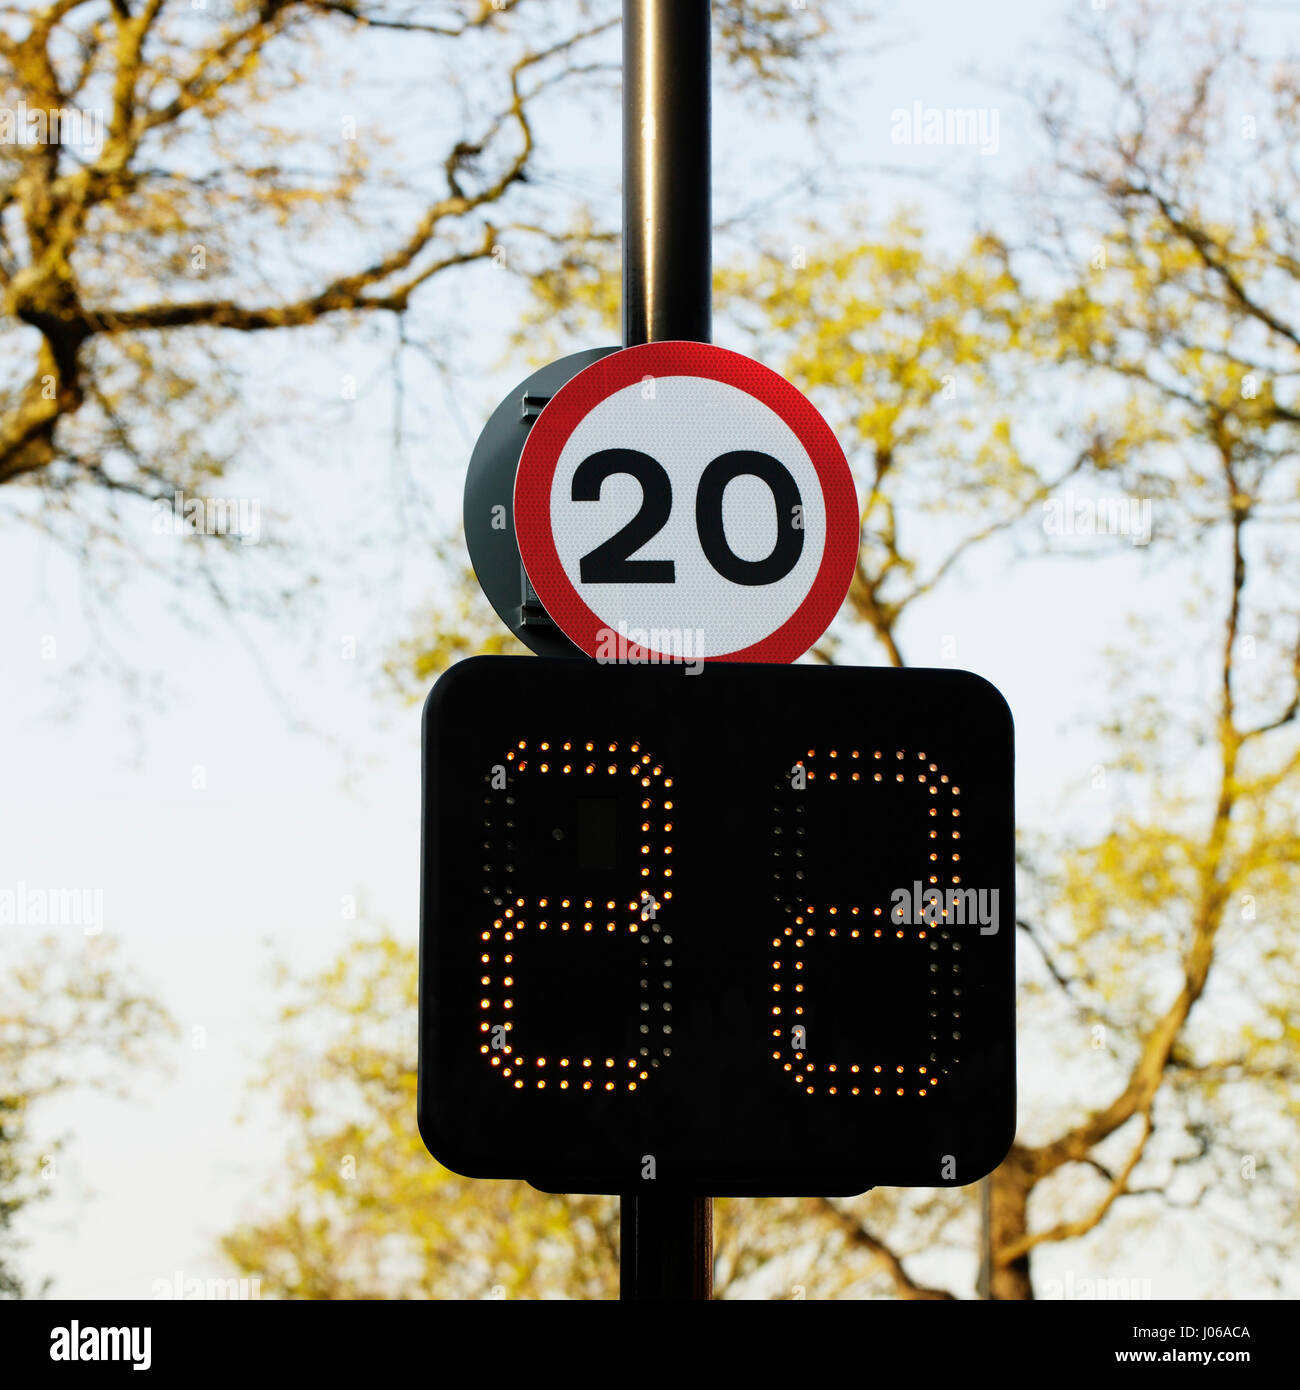 20 mph speed limit sign with speed indicator panel Stock Photo